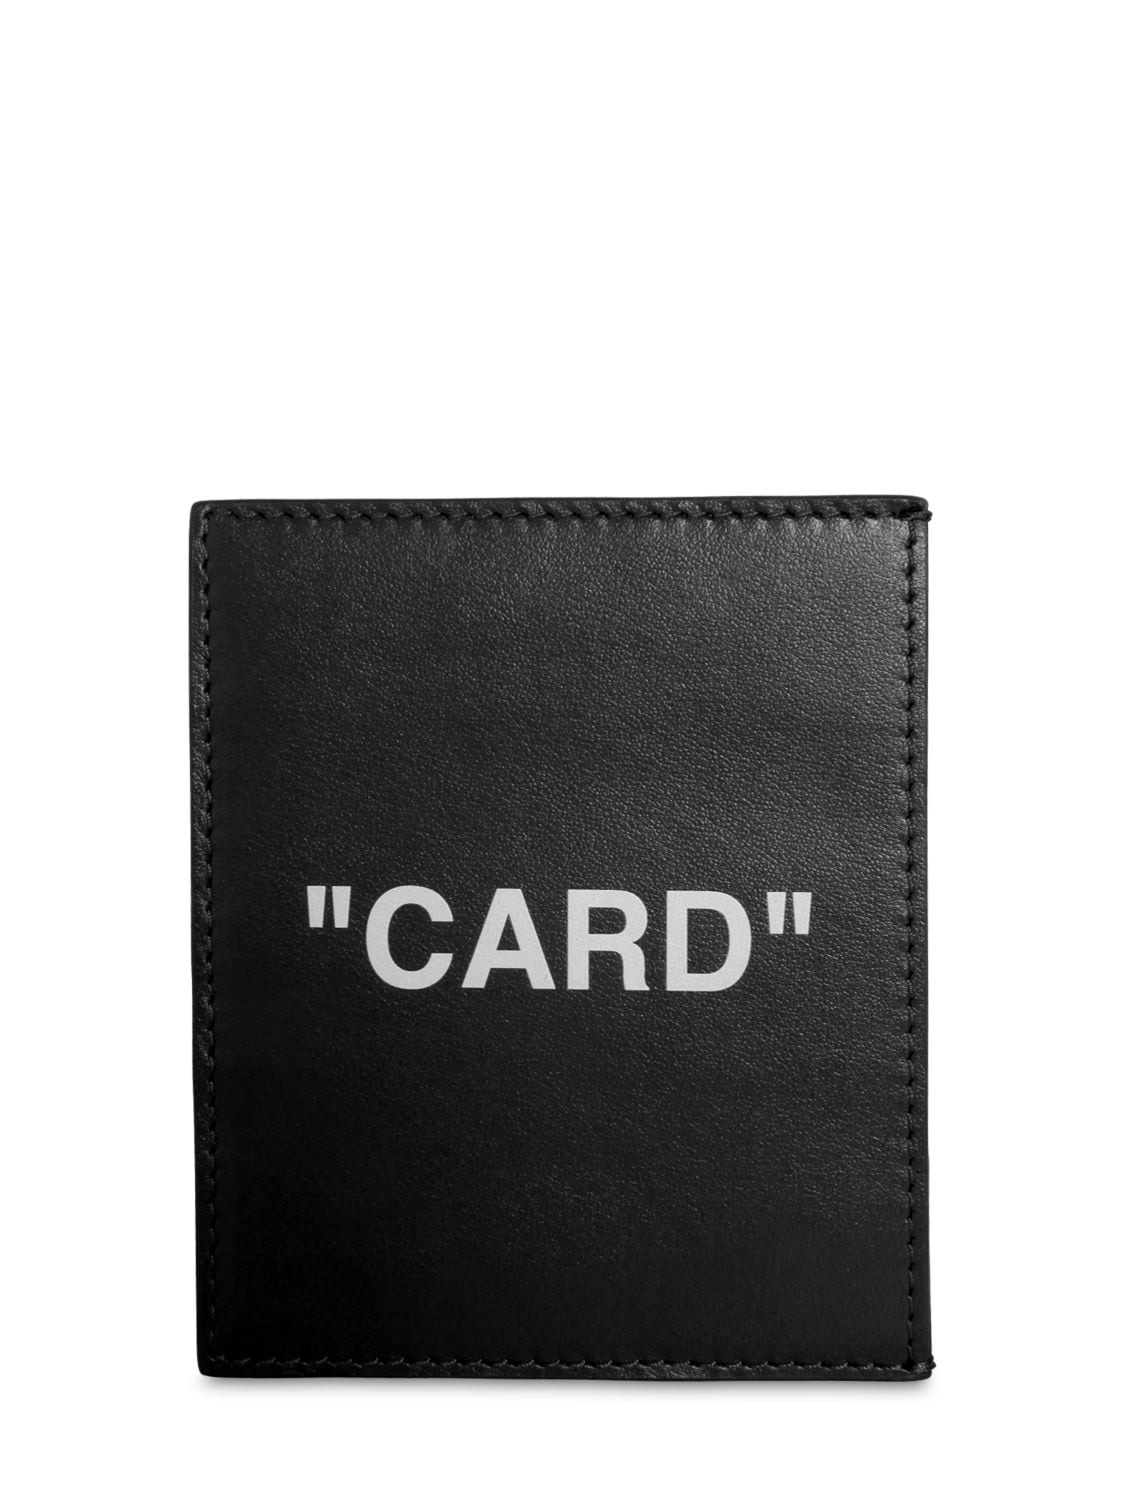 OFF-WHITE PRINTED LEATHER CARDHOLDER,69IJS5009-MTAWMQ2